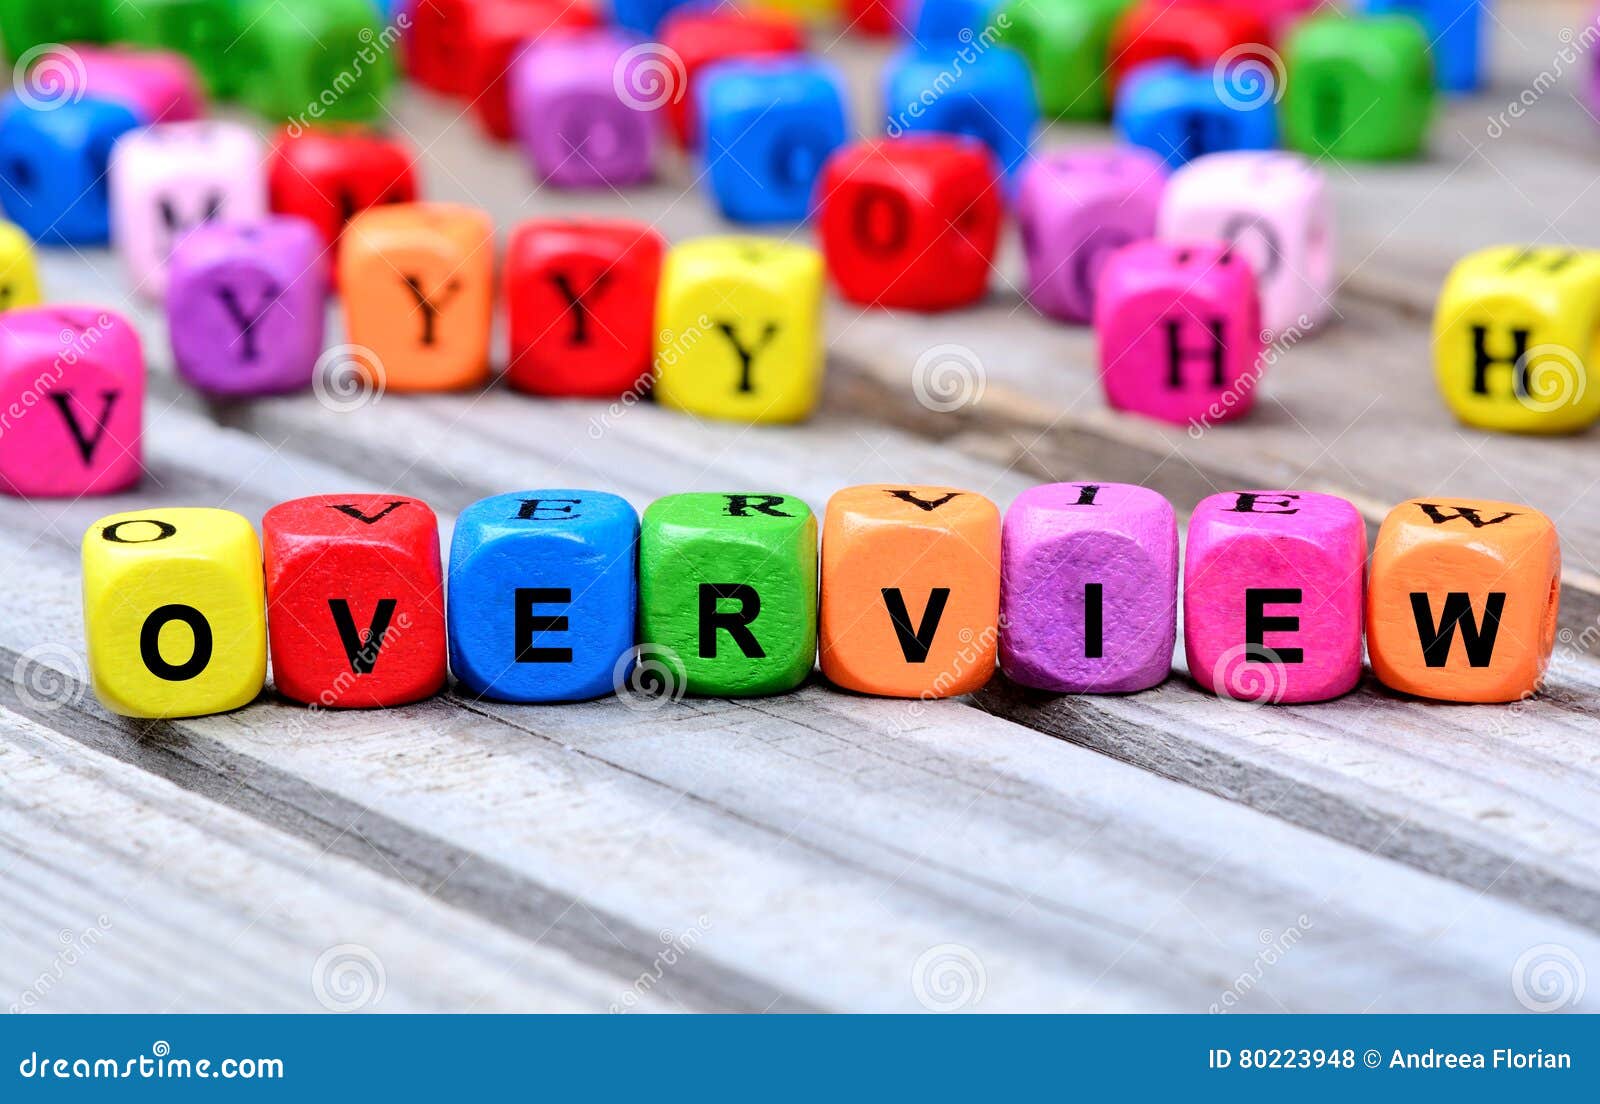 the colorful word overview on table